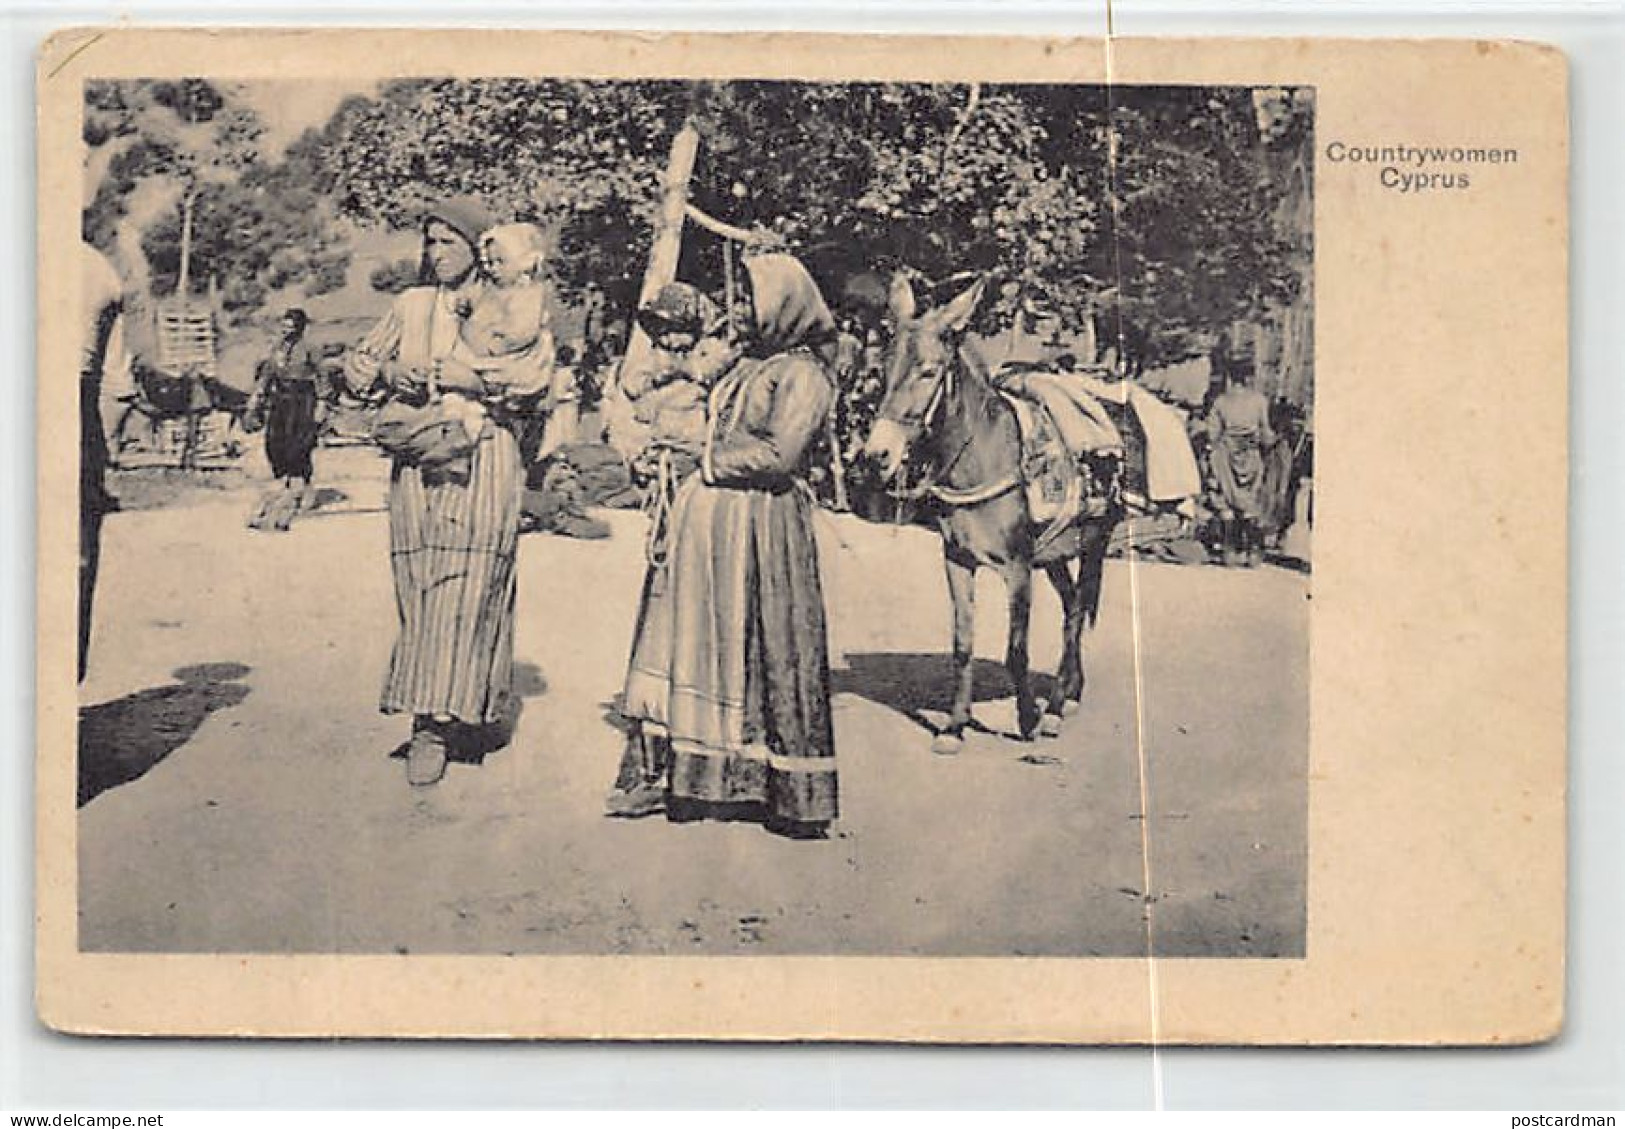 Cyprus - Countrywomen - SEE SCANS FOR CONDITION - Publ. J. P. Foscolo - Chipre